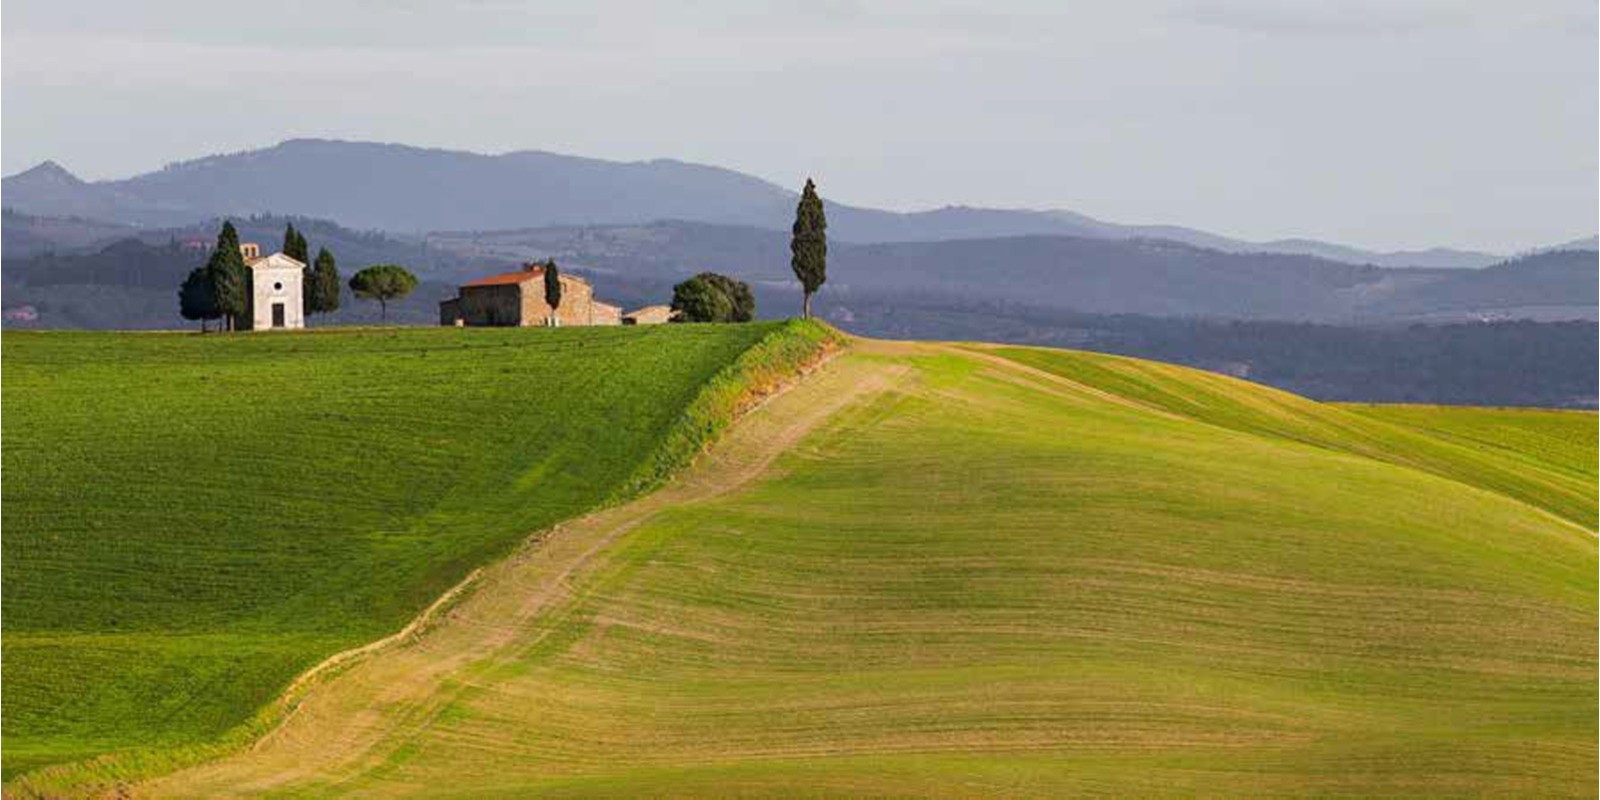 Pangea Images - Val d’Orcia, Siena, Tuscany (detail)